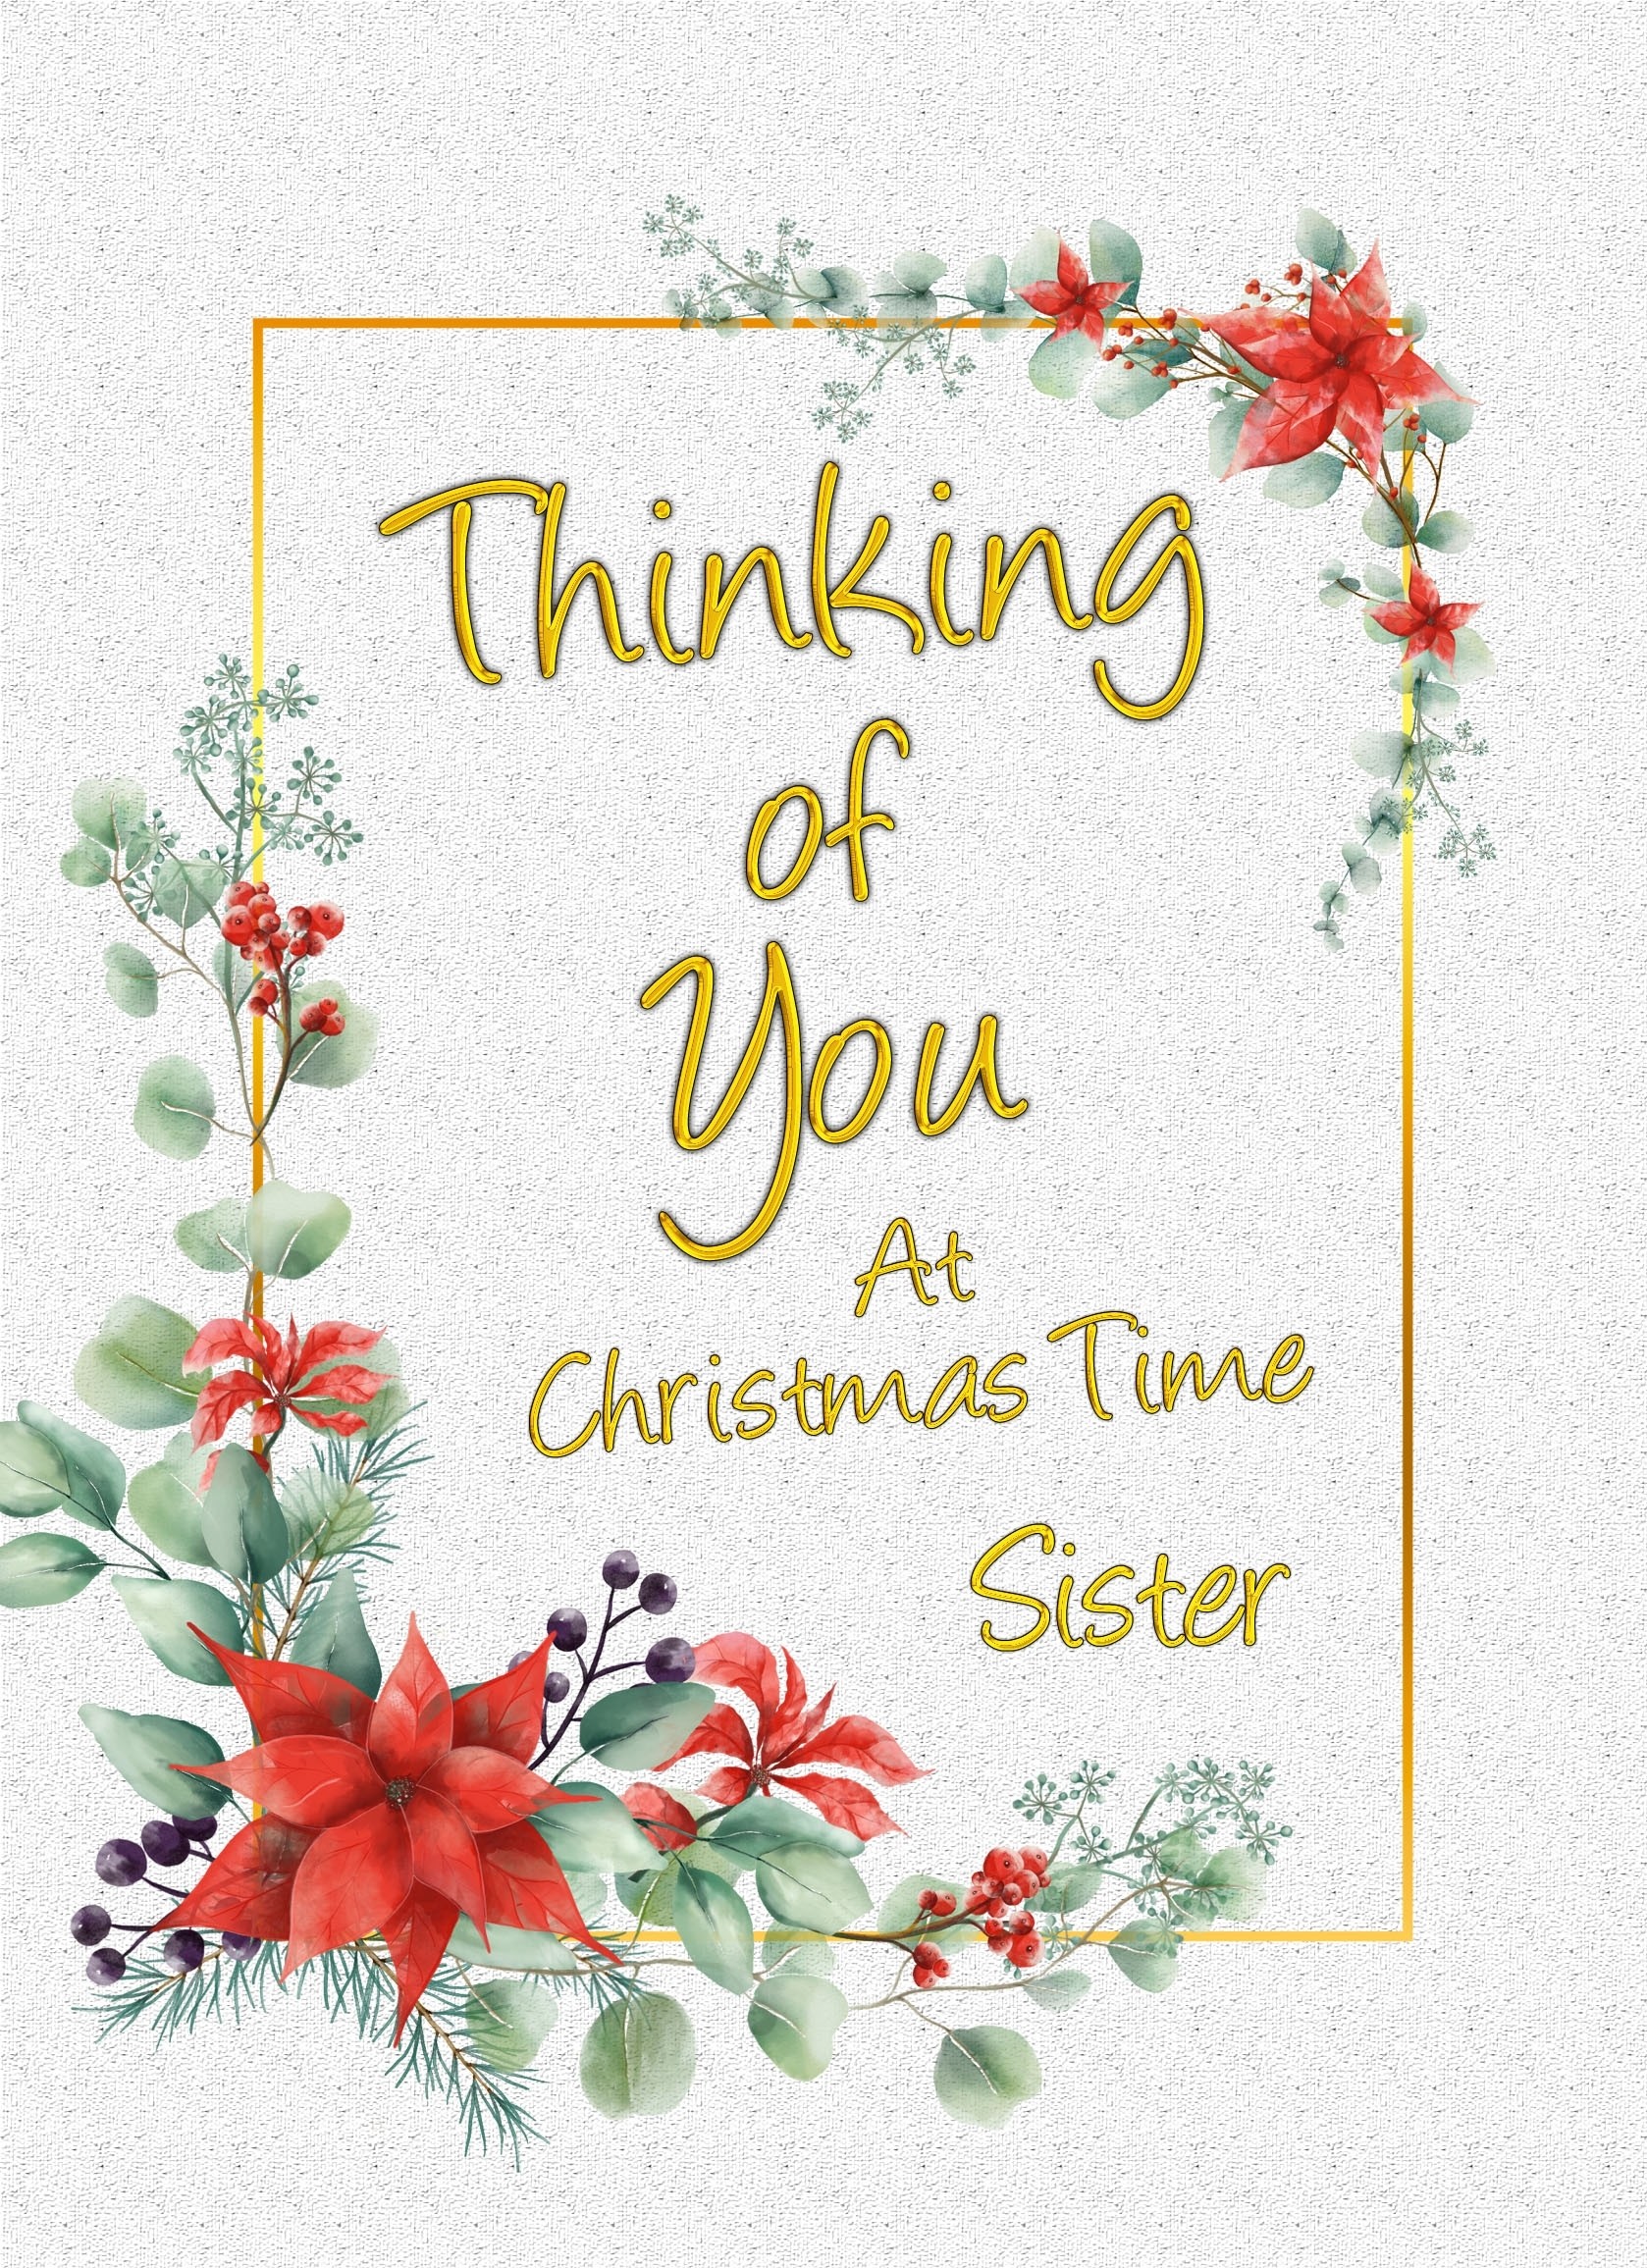 Thinking of You at Christmas Card For Sister